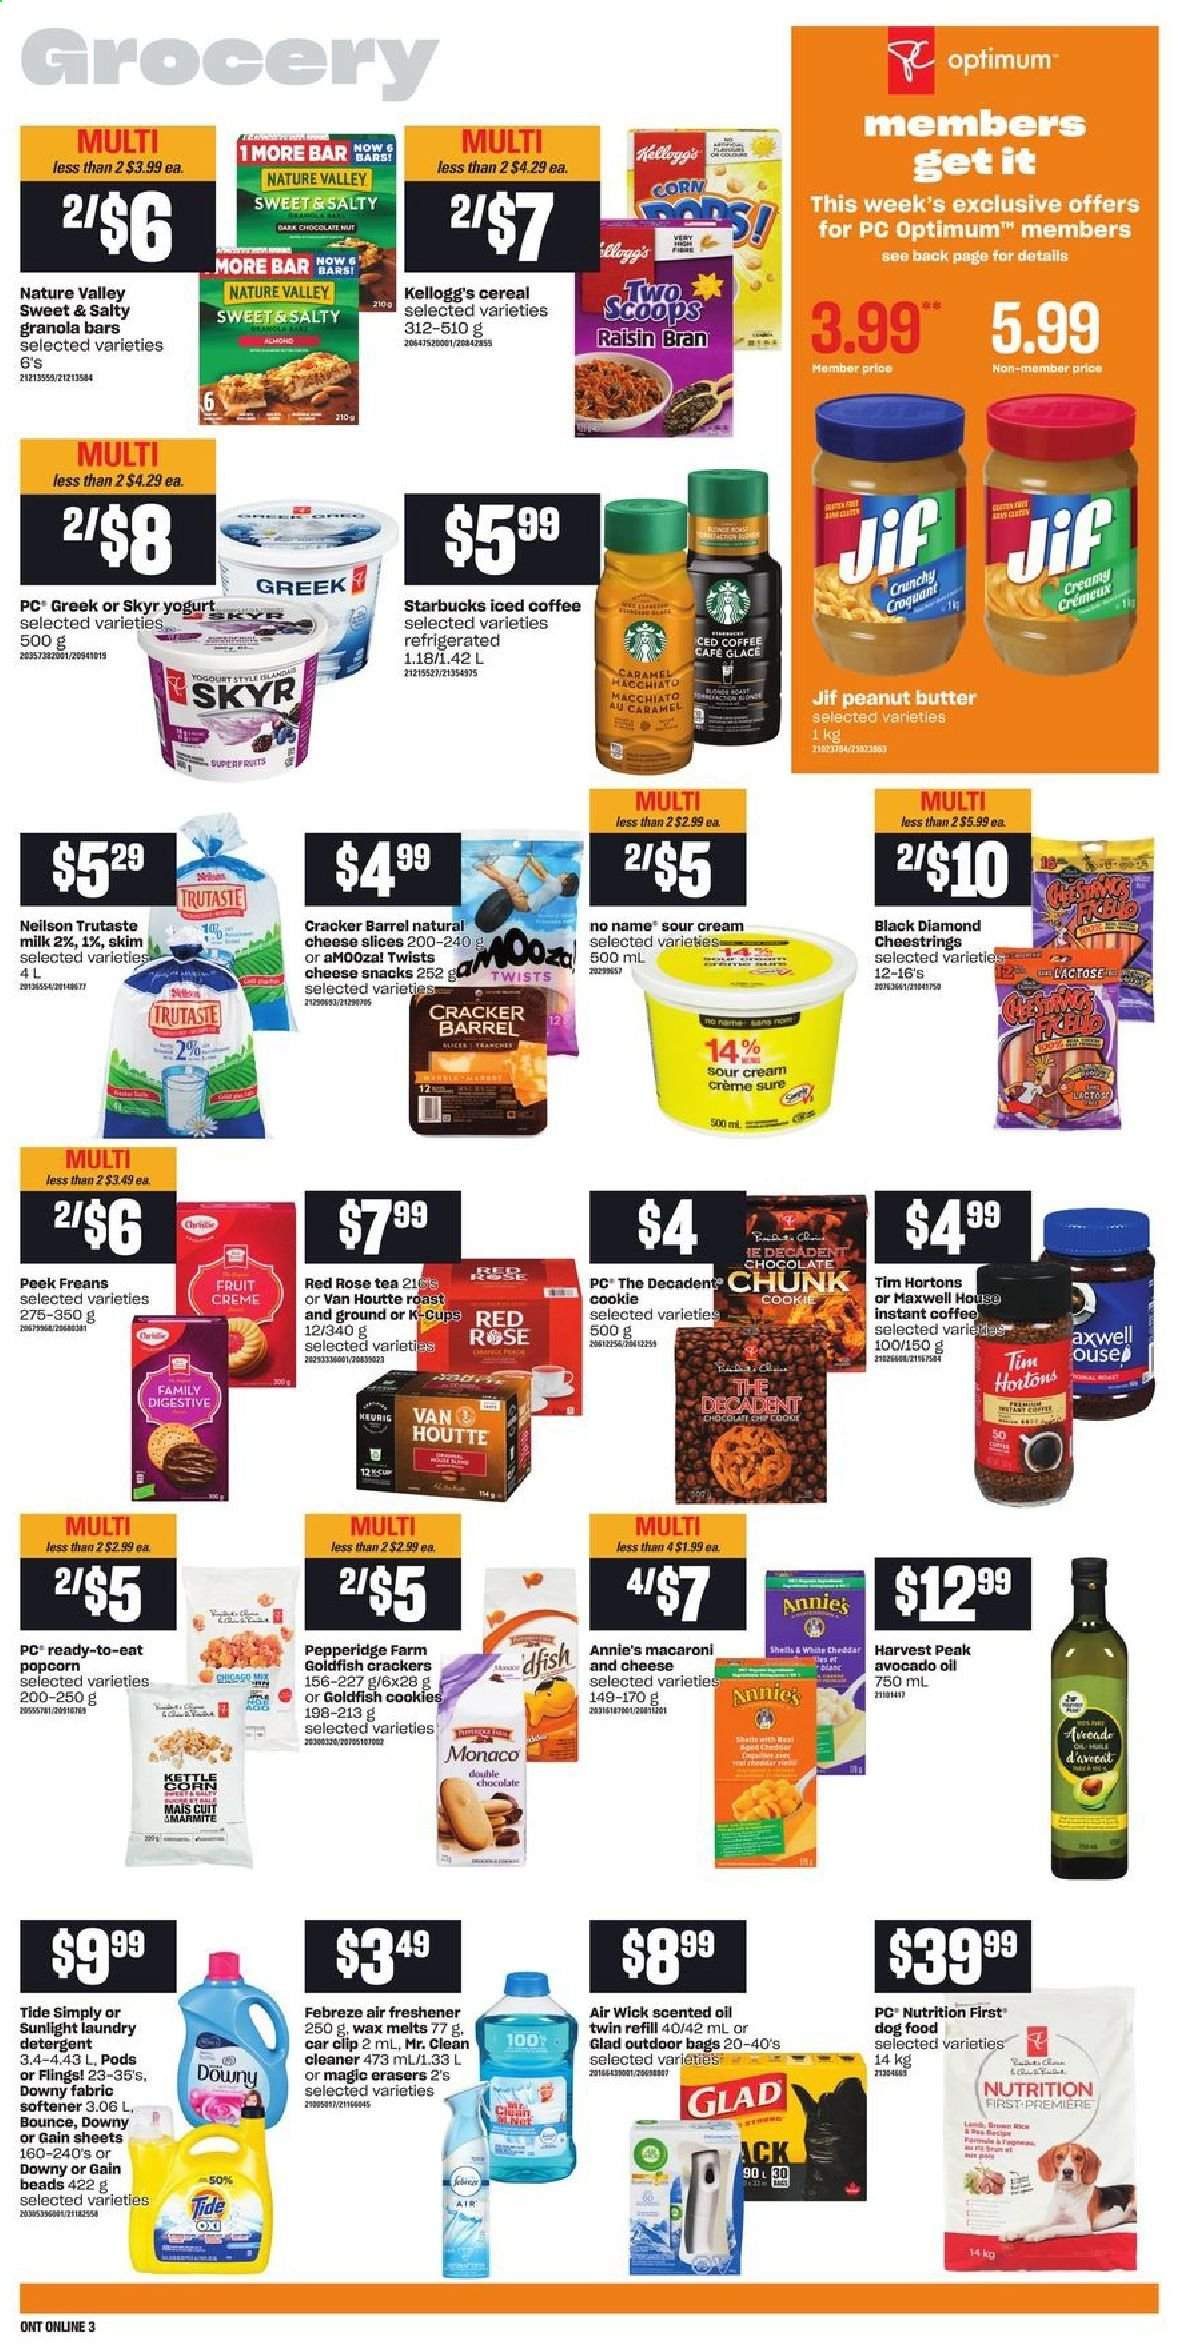 thumbnail - Loblaws Flyer - May 27, 2021 - June 02, 2021 - Sales products - No Name, macaroni & cheese, Annie's, sliced cheese, string cheese, yoghurt, milk, sour cream, cookies, chocolate, snack, crackers, Kellogg's, Digestive, kettle corn, popcorn, Goldfish, cereals, granola bar, Raisin Bran, Nature Valley, caramel, avocado oil, oil, peanut butter, Jif, iced coffee, Maxwell House, tea, instant coffee, coffee capsules, Starbucks, K-Cups, wine, rosé wine, Febreze, Gain, cleaner, Tide, fabric softener, laundry detergent, Sunlight, Bounce, Downy Laundry, Sure, PREMIERE, animal food, dog food, Optimum. Page 7.